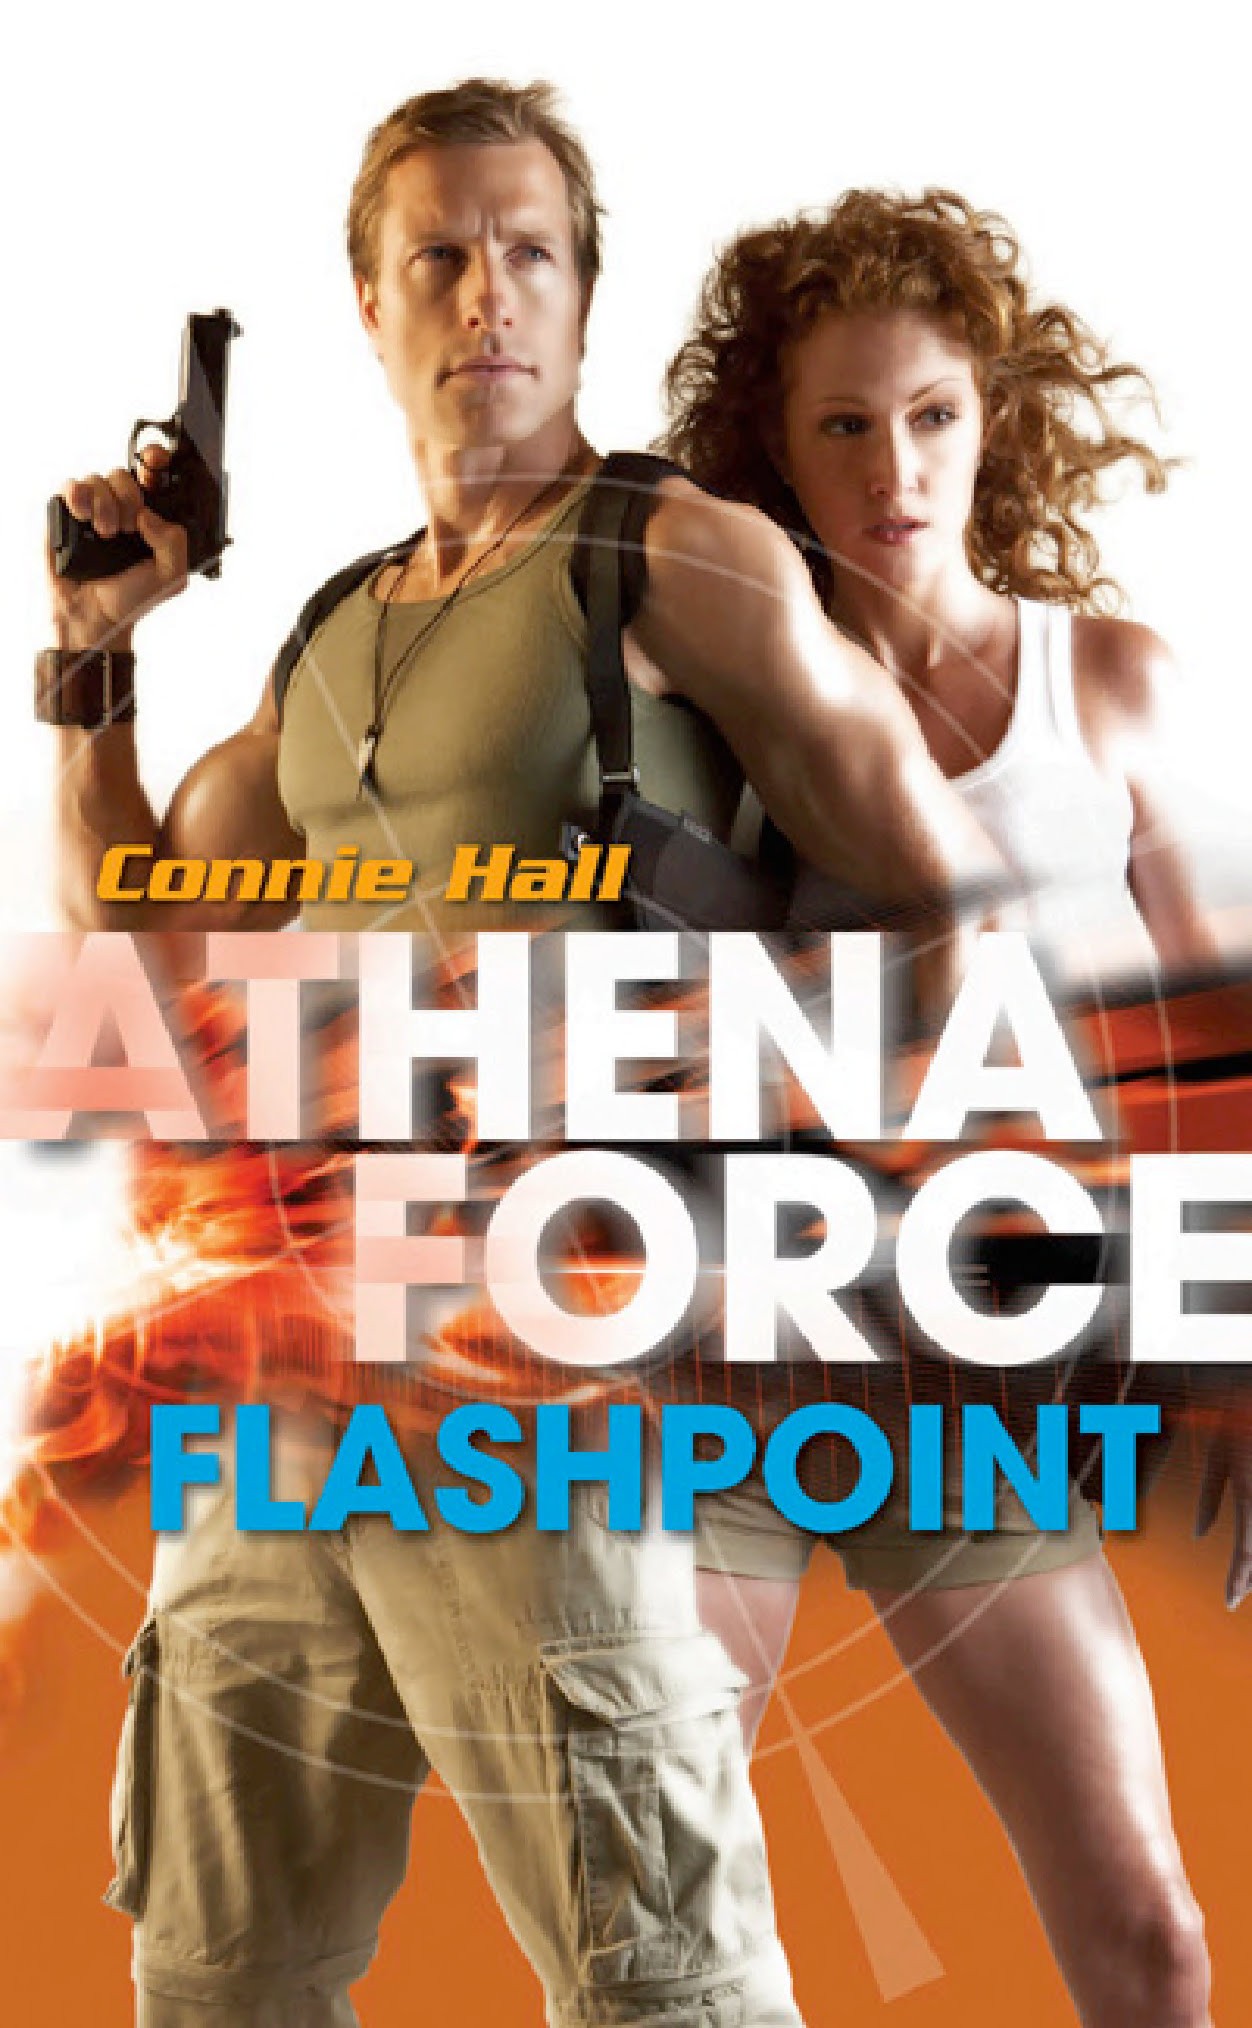 Flashpoint (Athena Force #26)